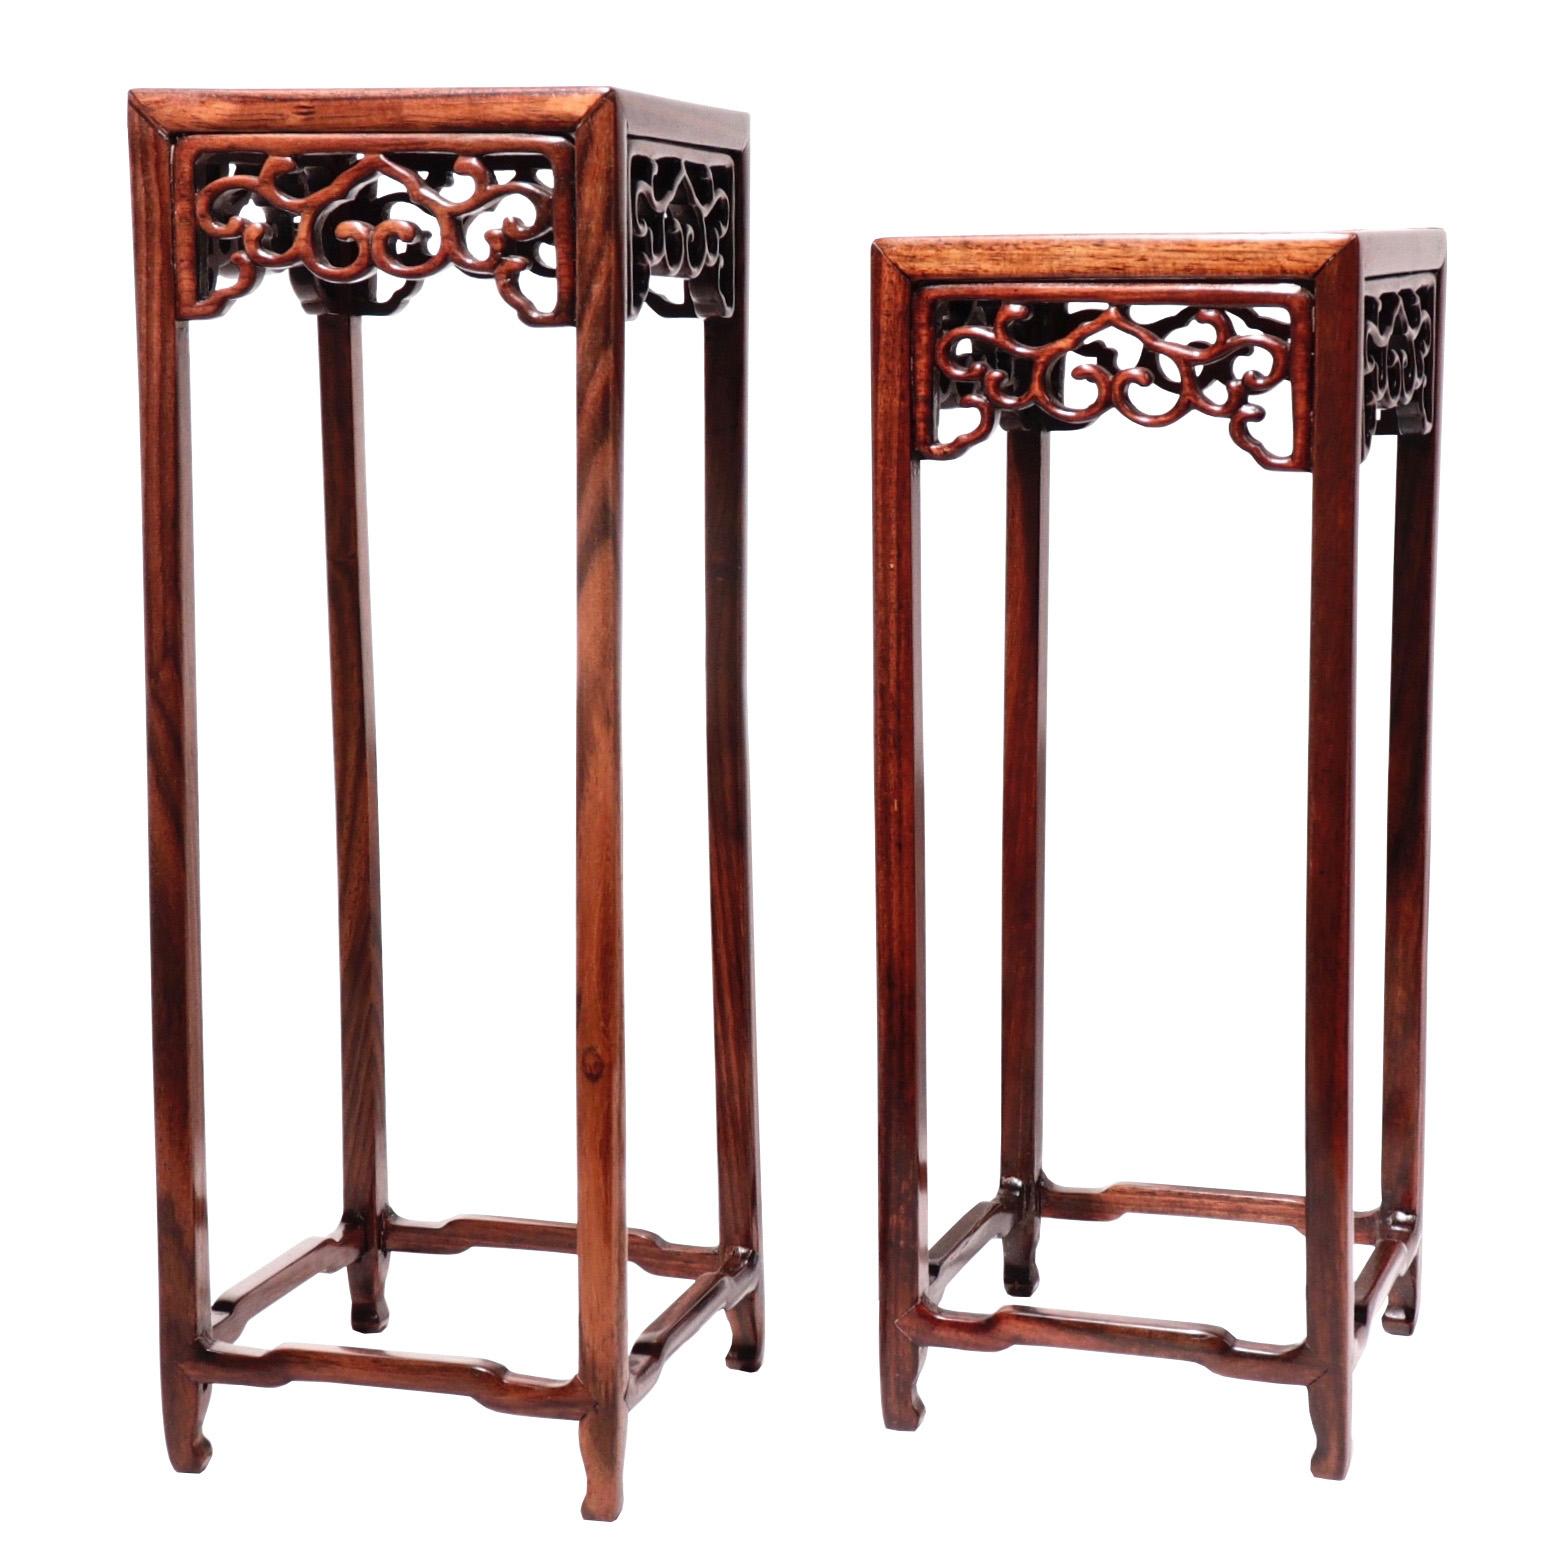 A set of two Chinese rosewood and burl wood curio display stands, in a tall pedestal form with thin legs and delicate pierced work apron in a ruyi vine design, elbowed cross stretchers near the base and center burl wood panel, varied in